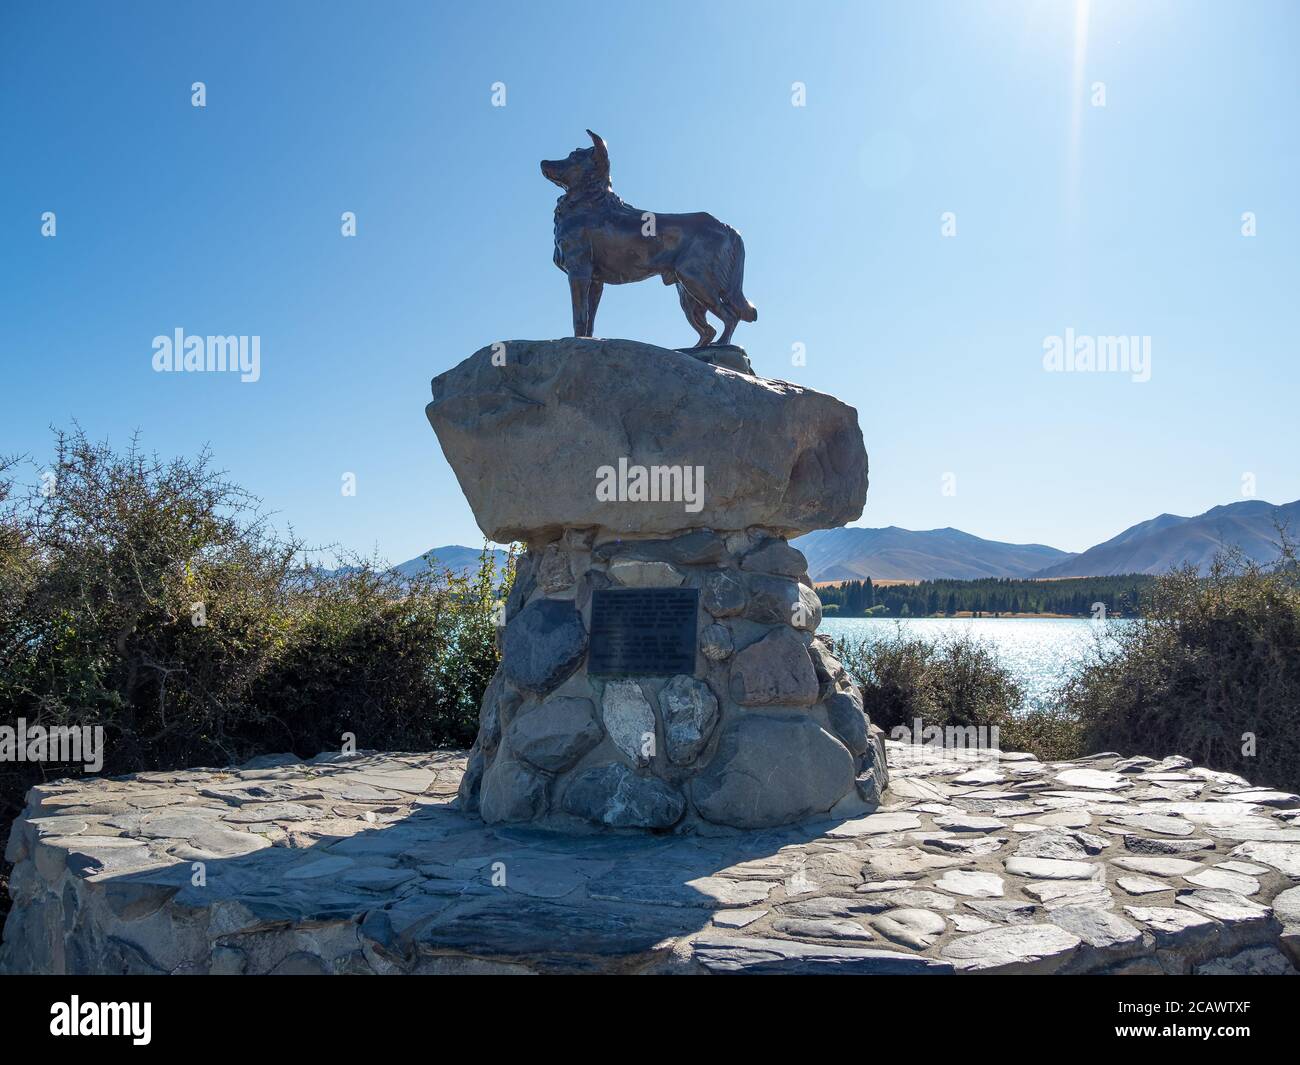 Tekapo, New Zealand - Feb 11, 2020: The sheepdog memorial is a well known bronze statue of a New Zealand Collie sheepdog close to the Church of the Go Stock Photo